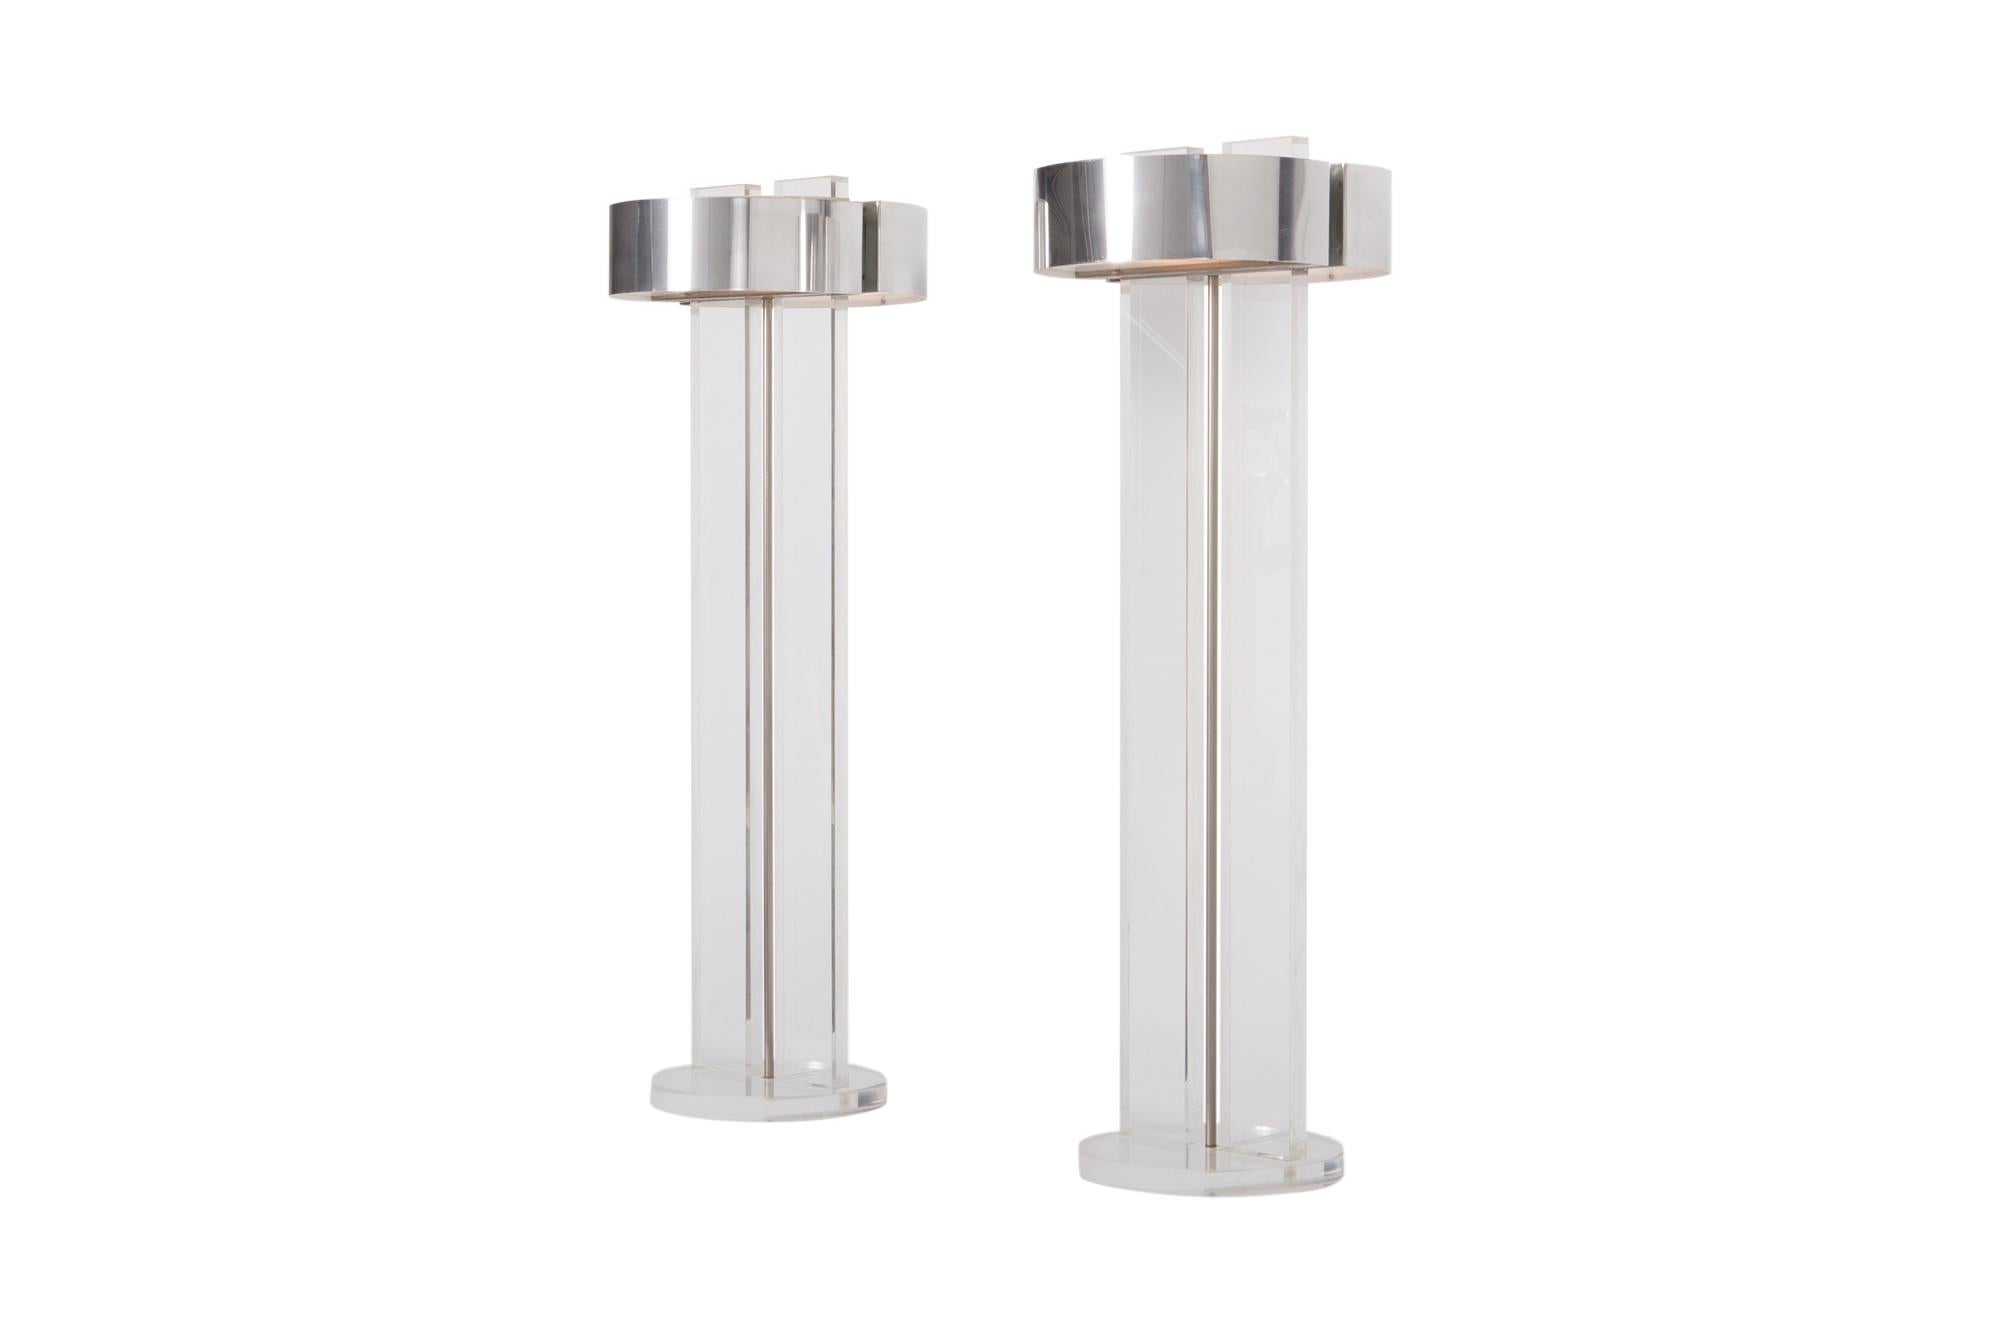 French Perspex Postmodern floor lamps with Chrome Shade, Set of Two